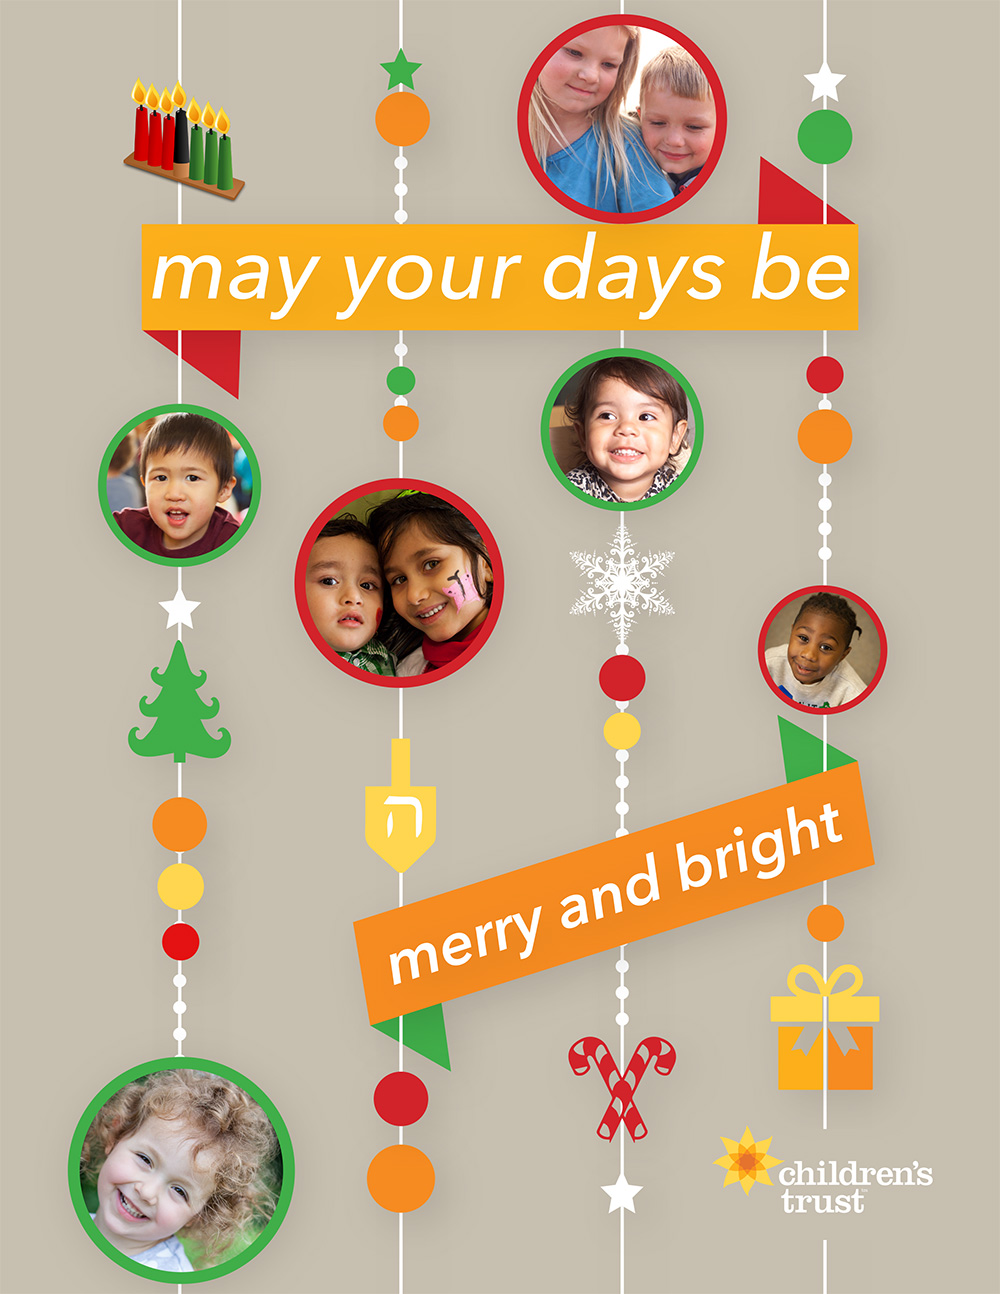 may your days be merry and bright!